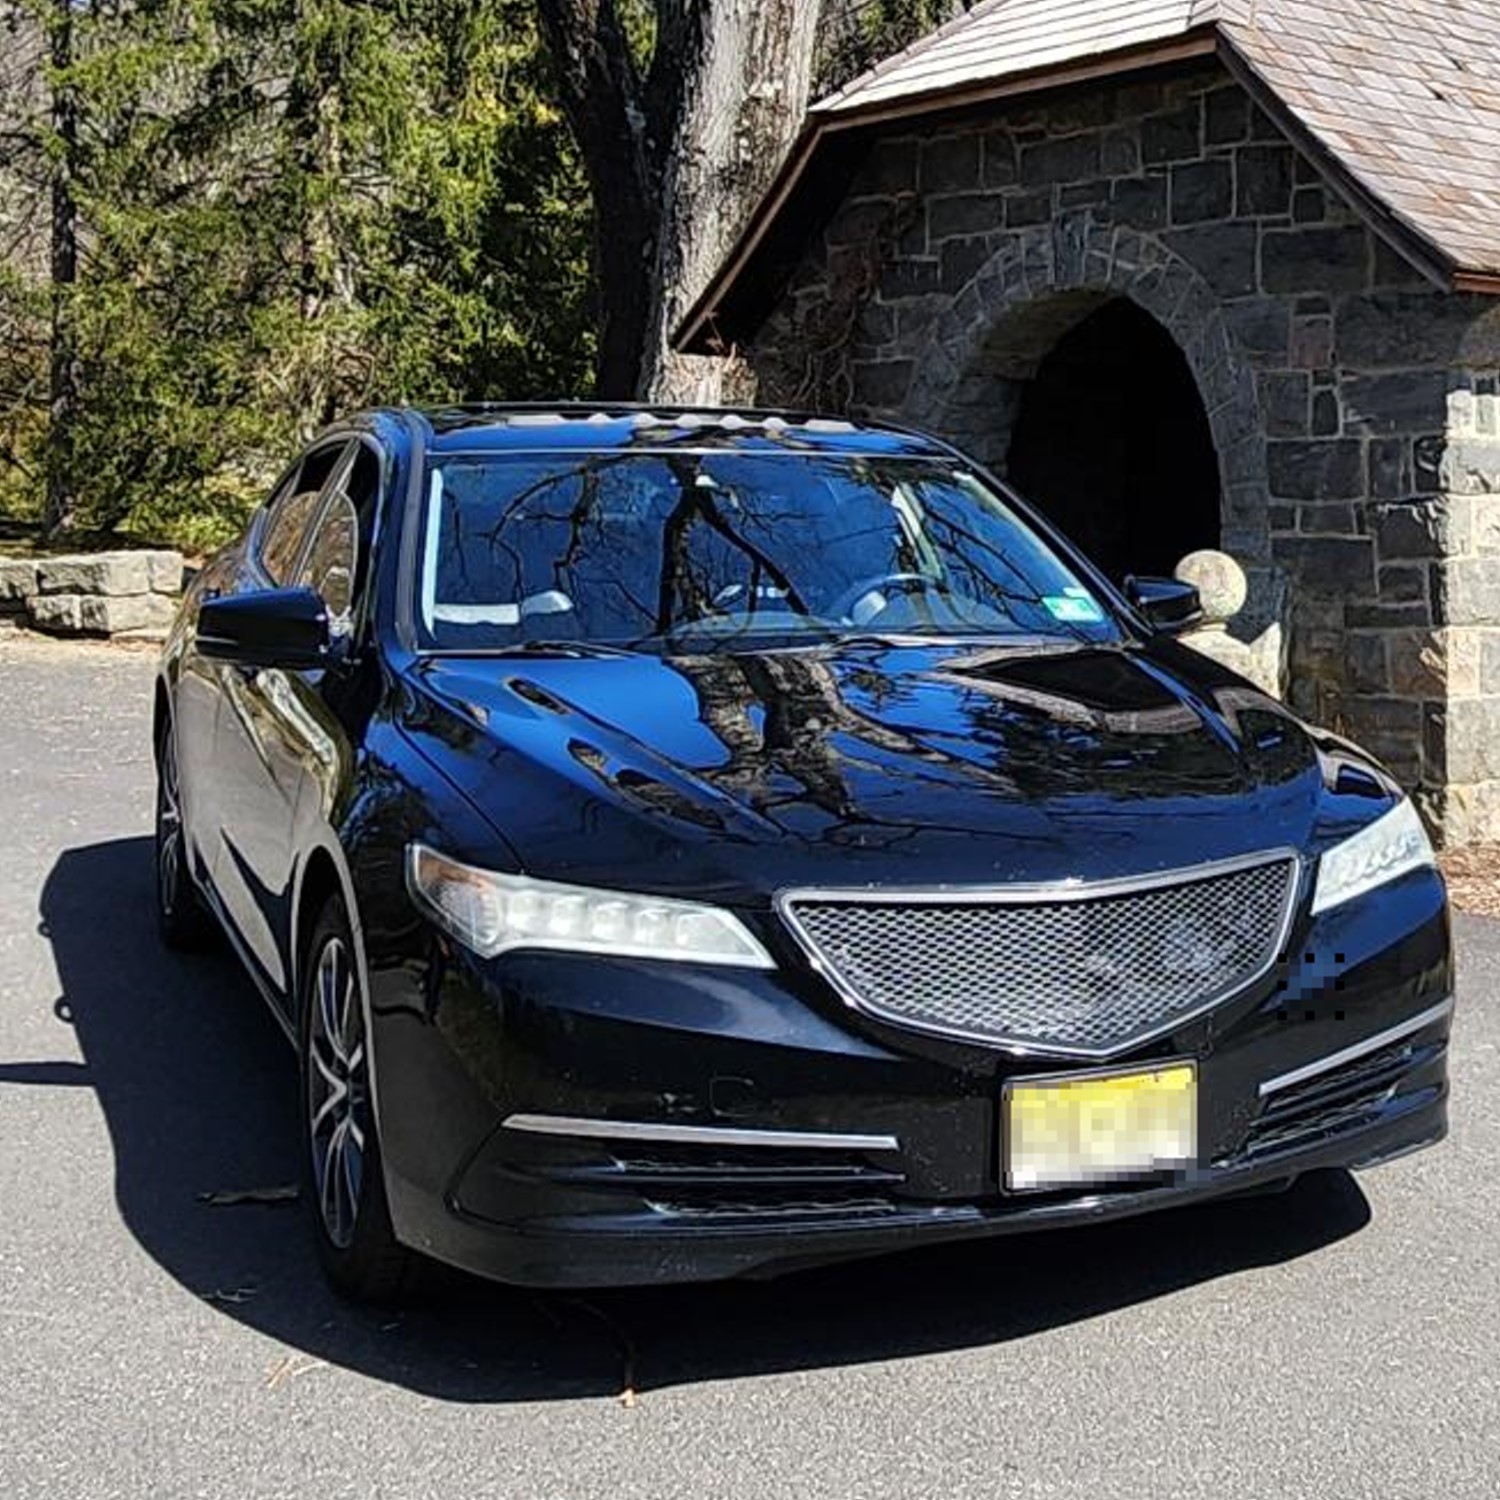 Redefining Acura TLX style with a custom grille and beak removal